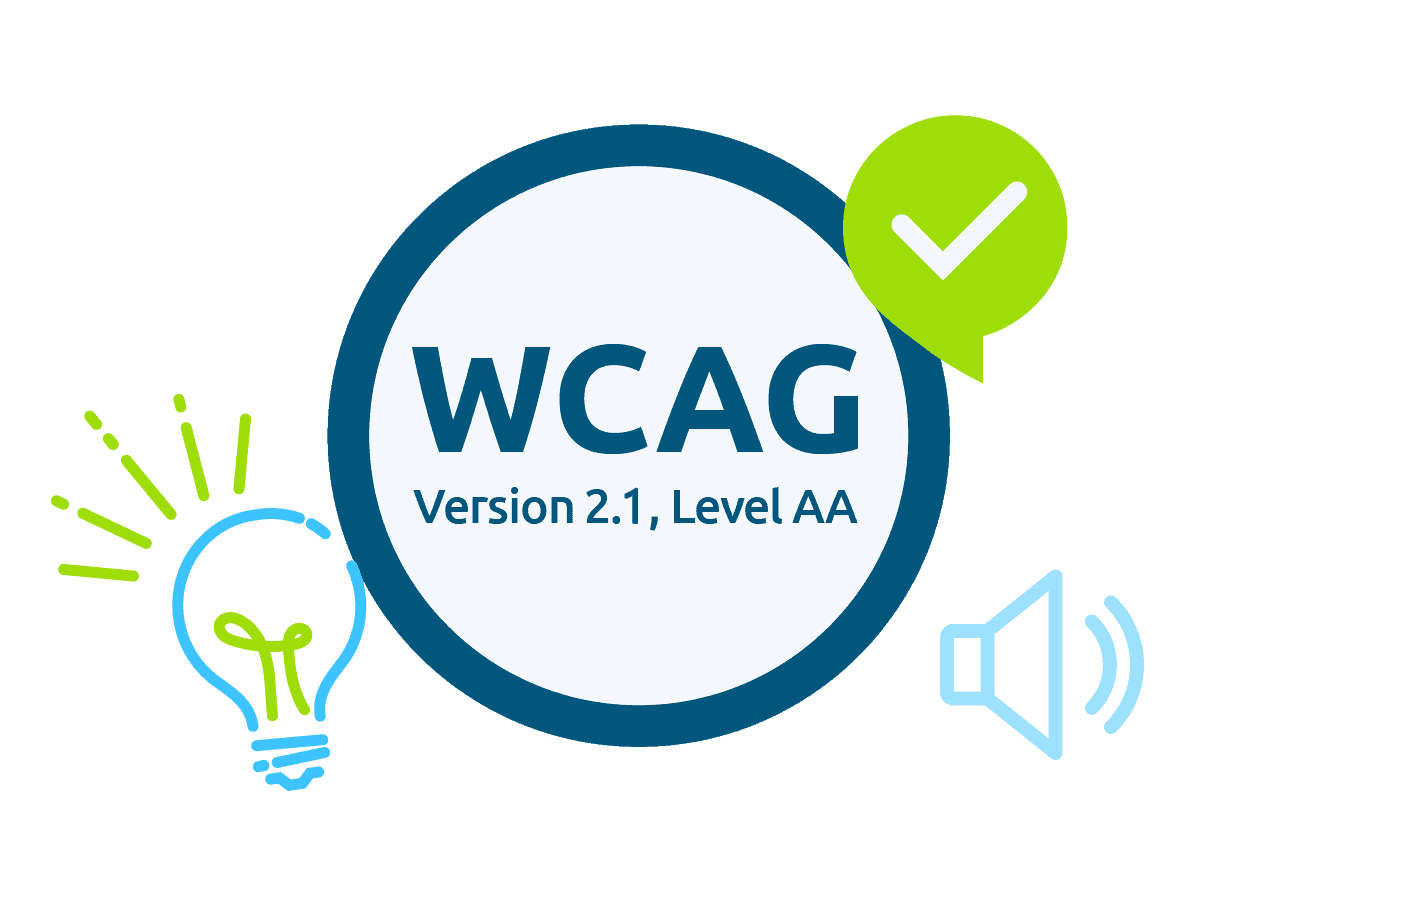 Comm100 live chat is WCAG Compliant